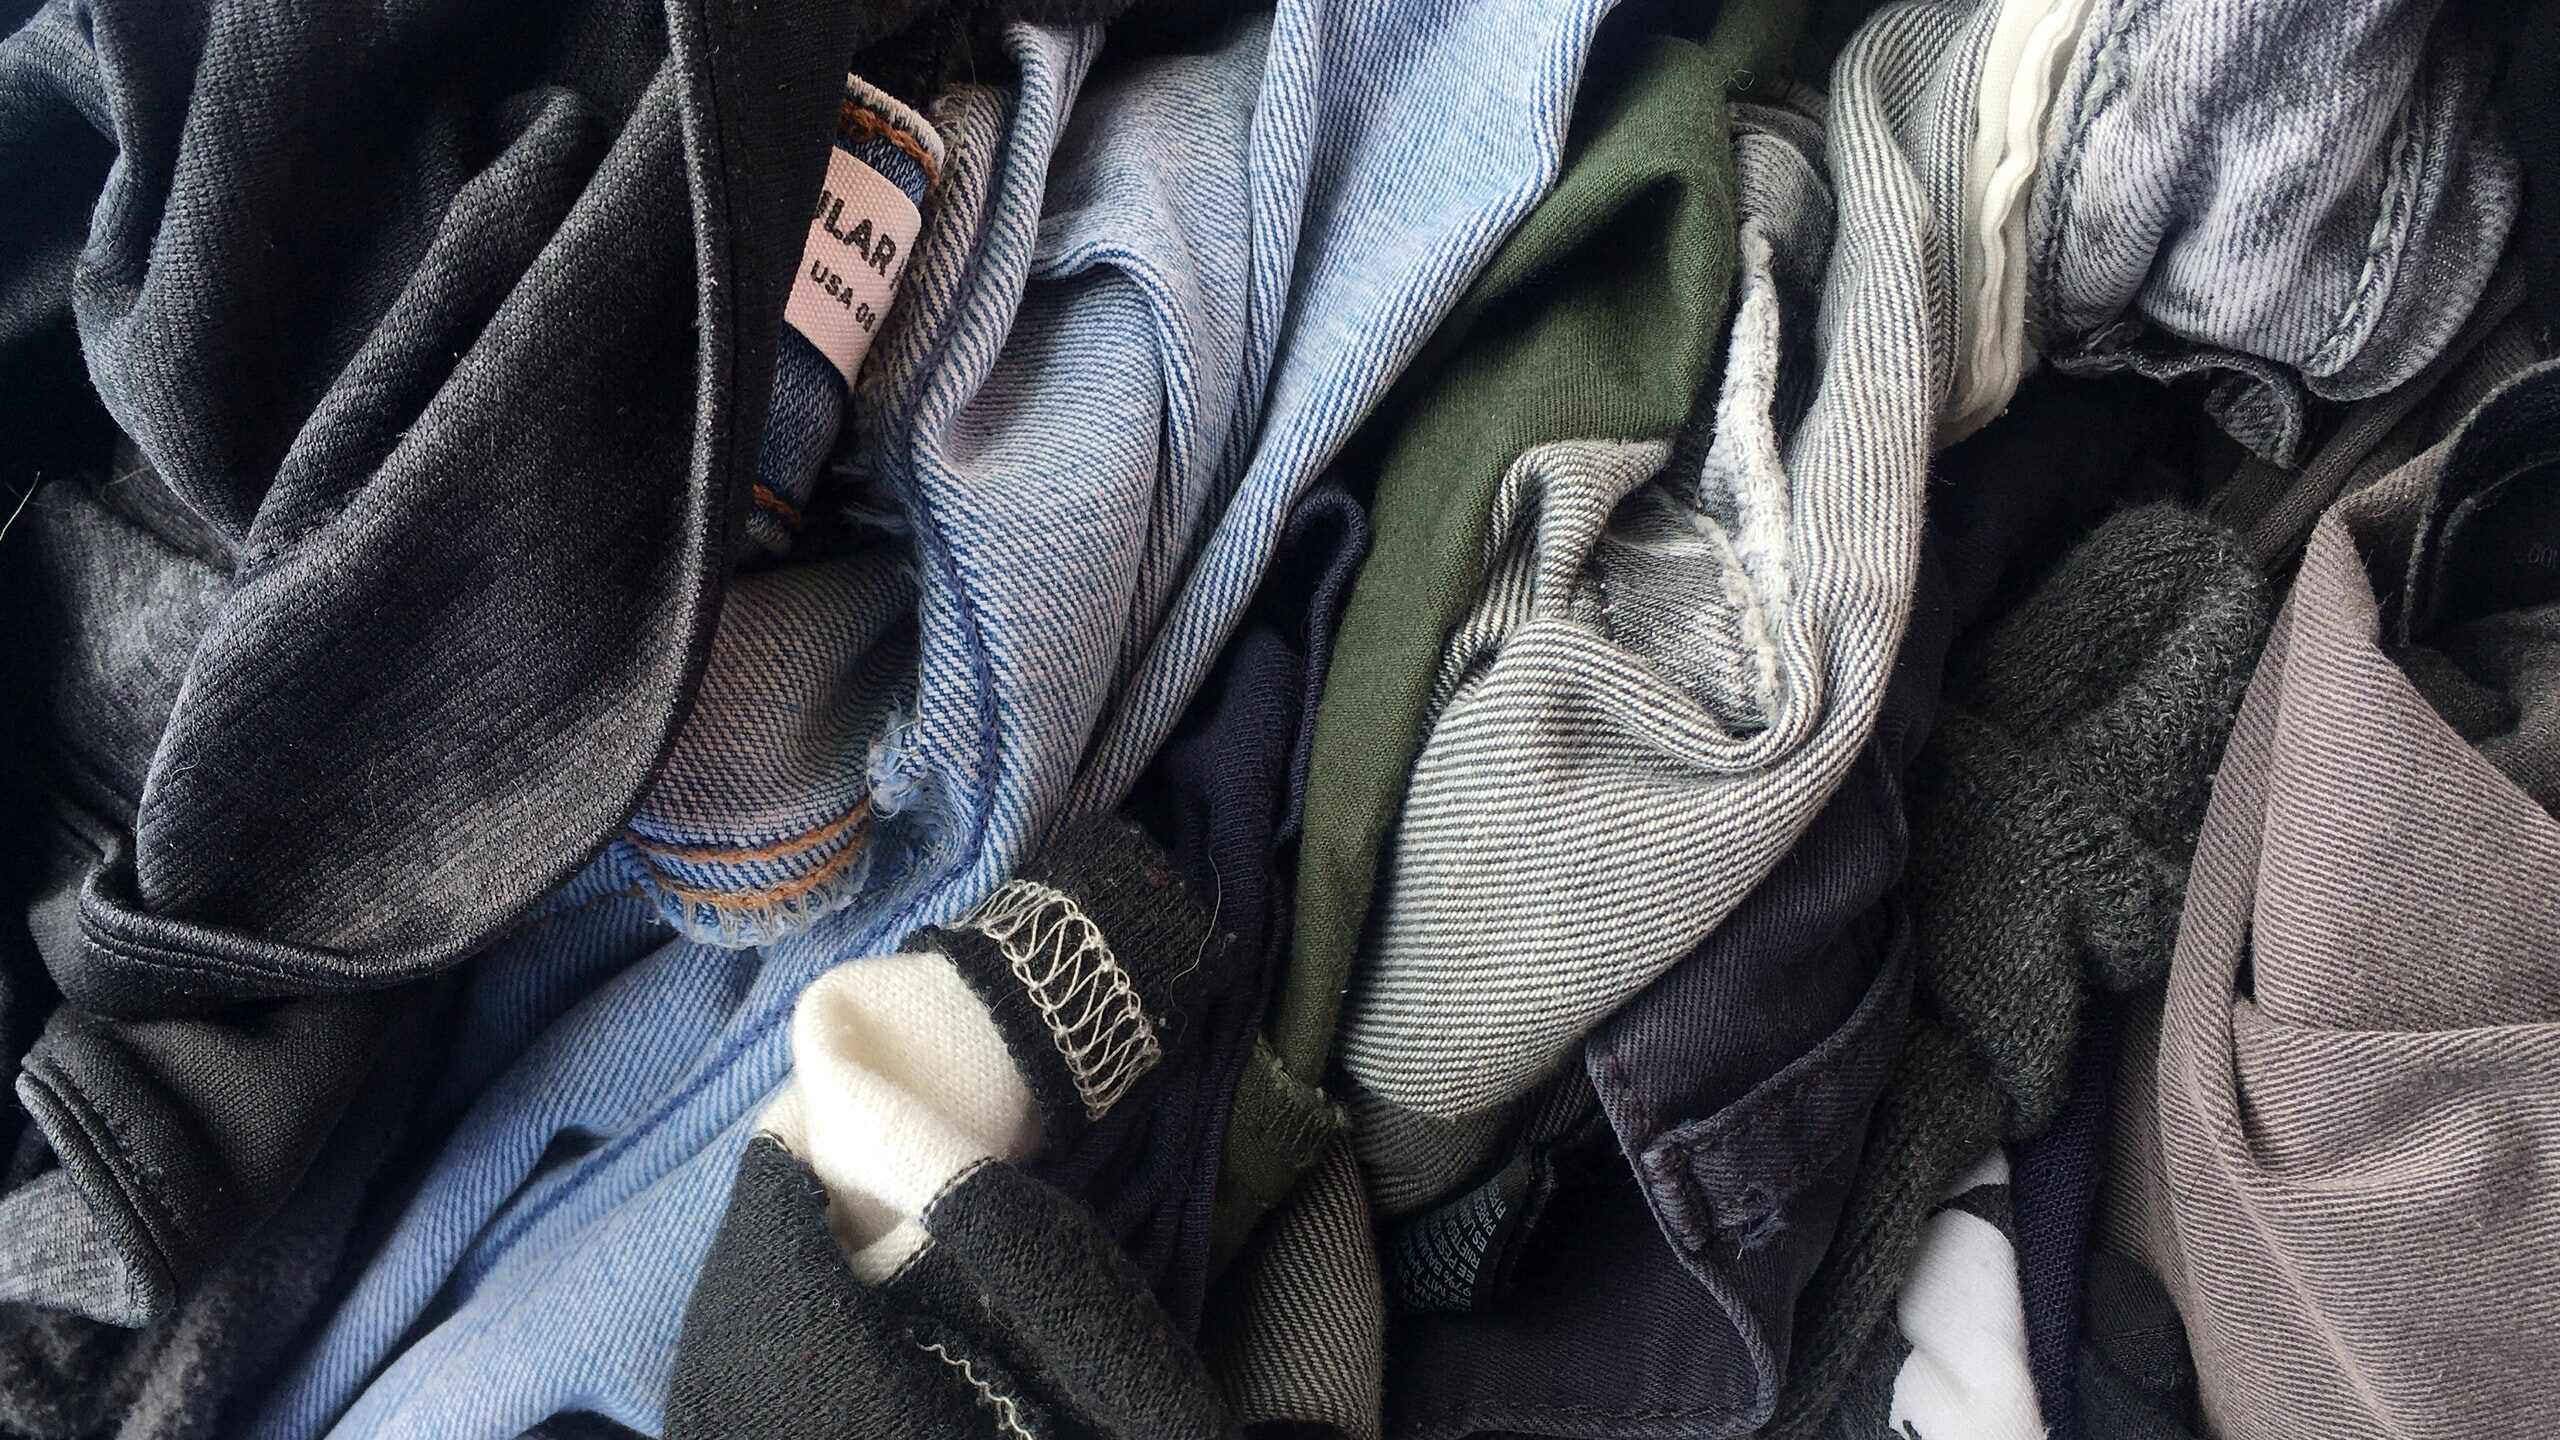 A clump of unfolded clothing.